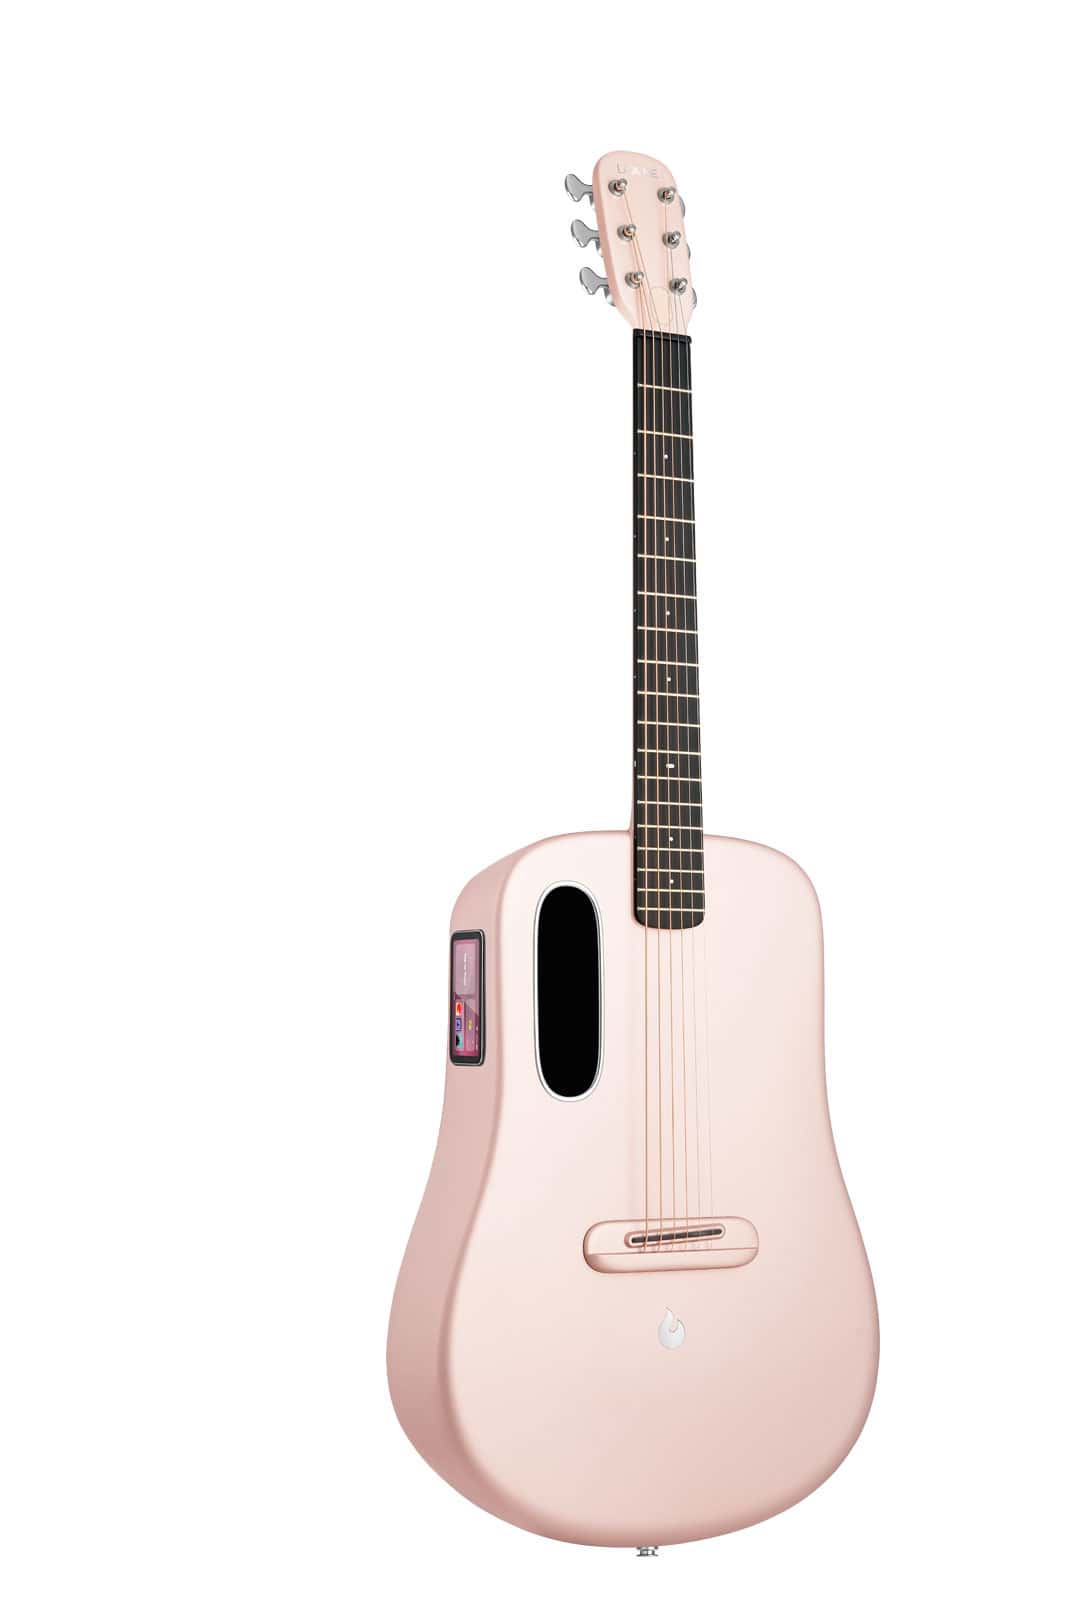 LAVA MUSIC LAVA ME 4 CARBON SERIES 36'' PINK - WITH SPACE BAG